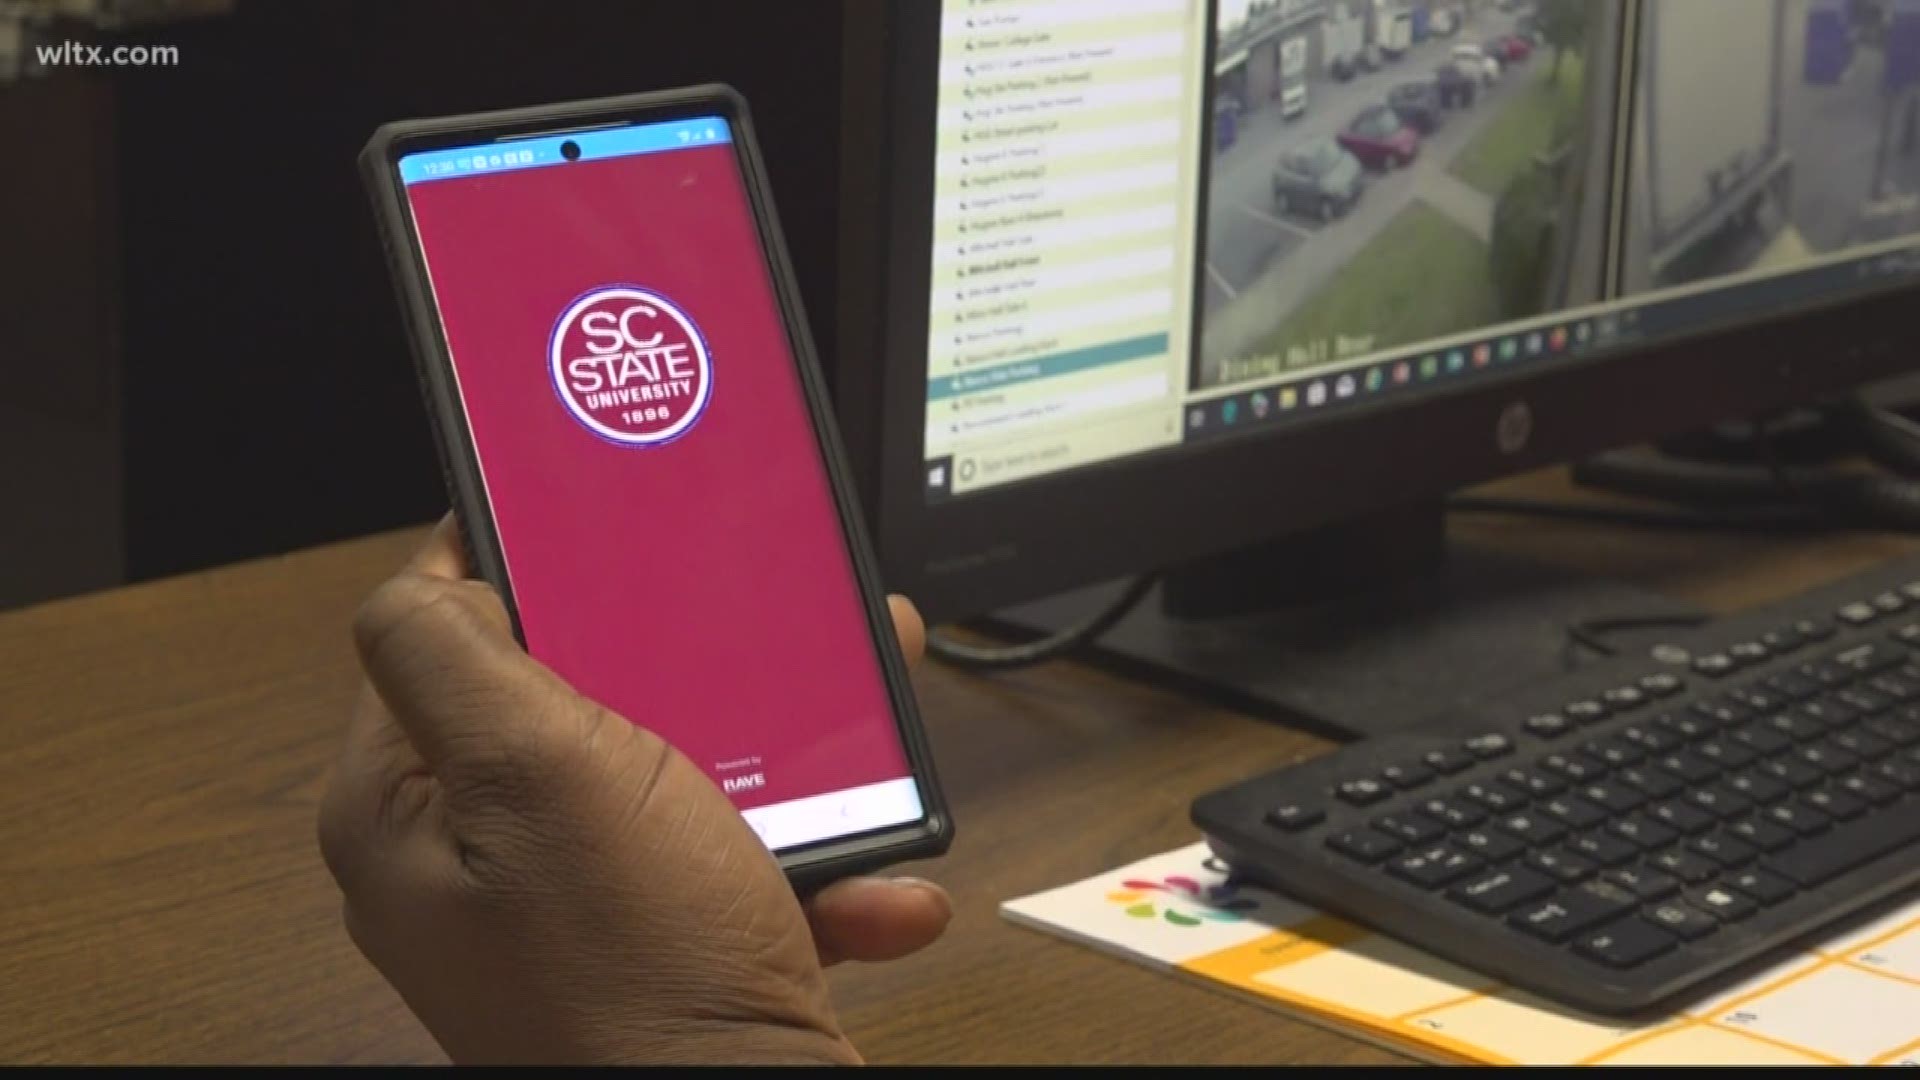 The app gives students the ability to talk directly with campus police